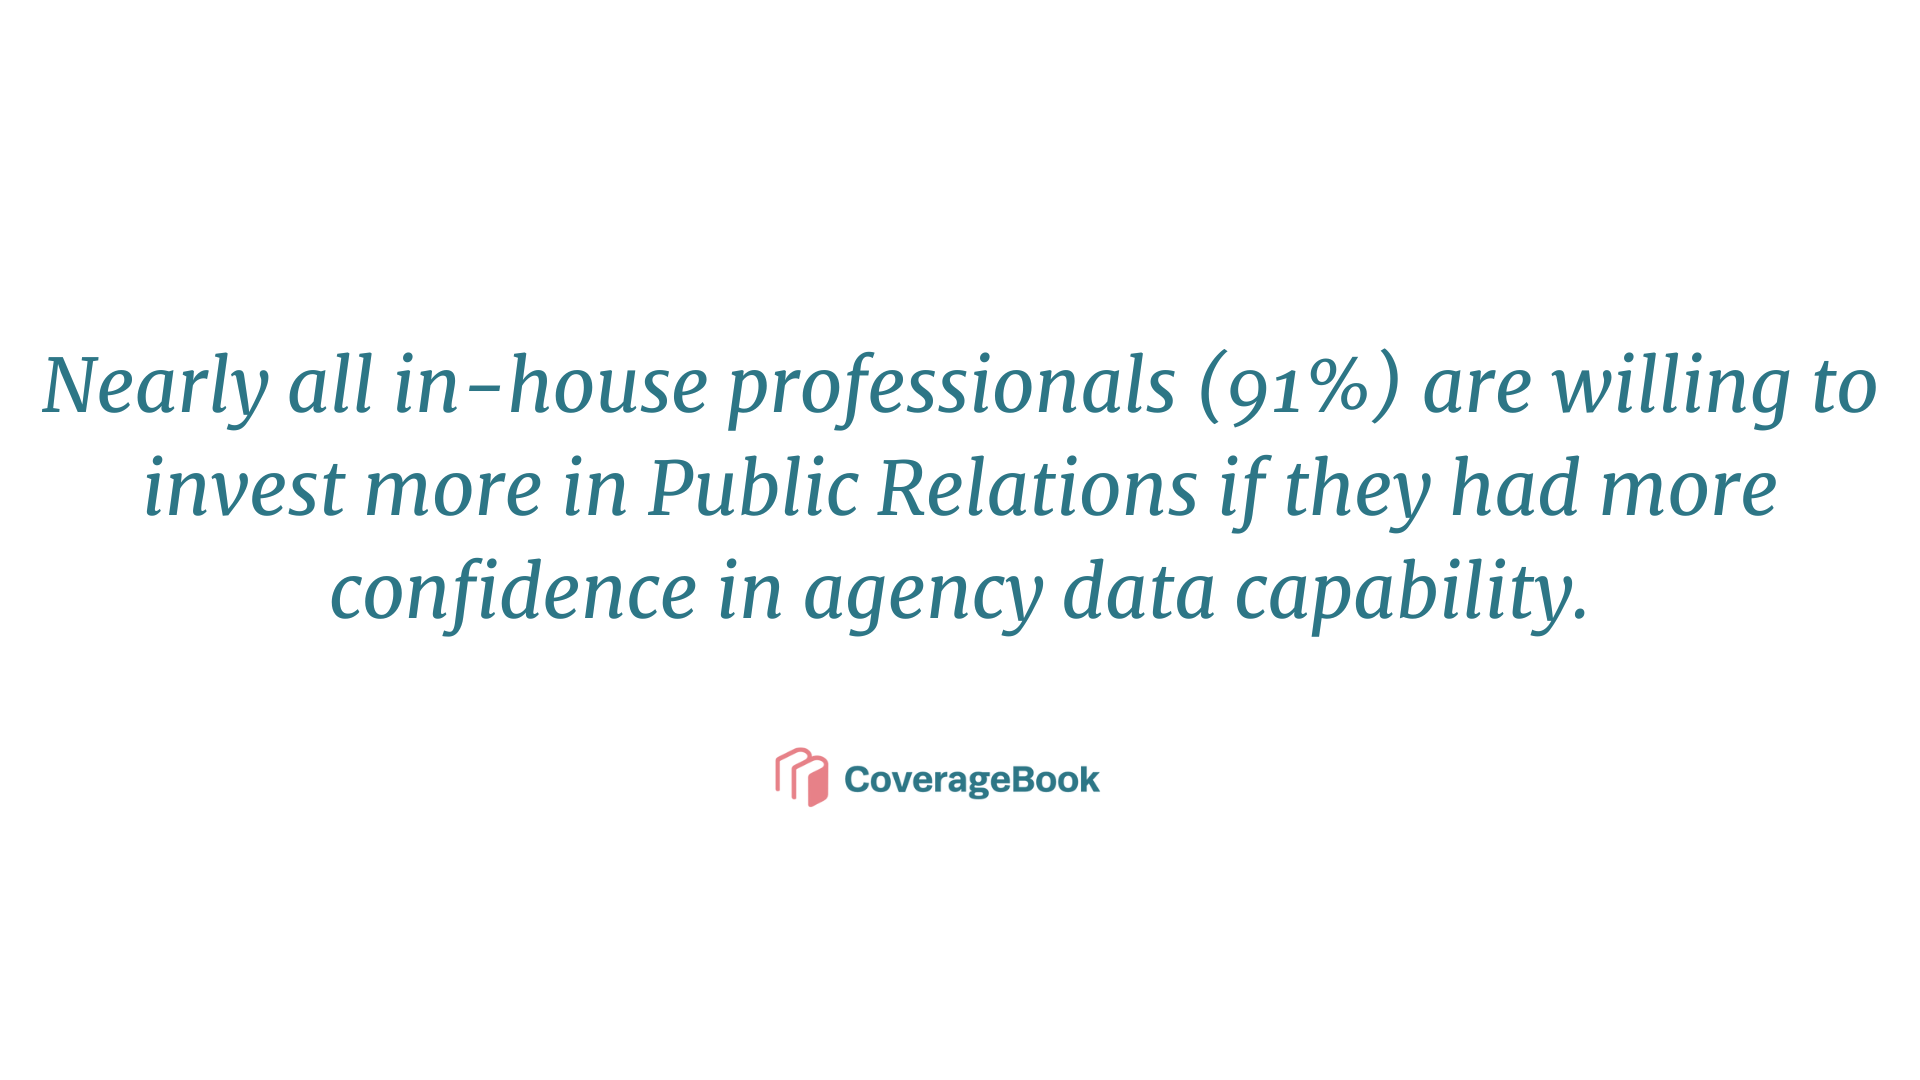 91% of in house professionals would invest in public relations if they had more confidence in agency data